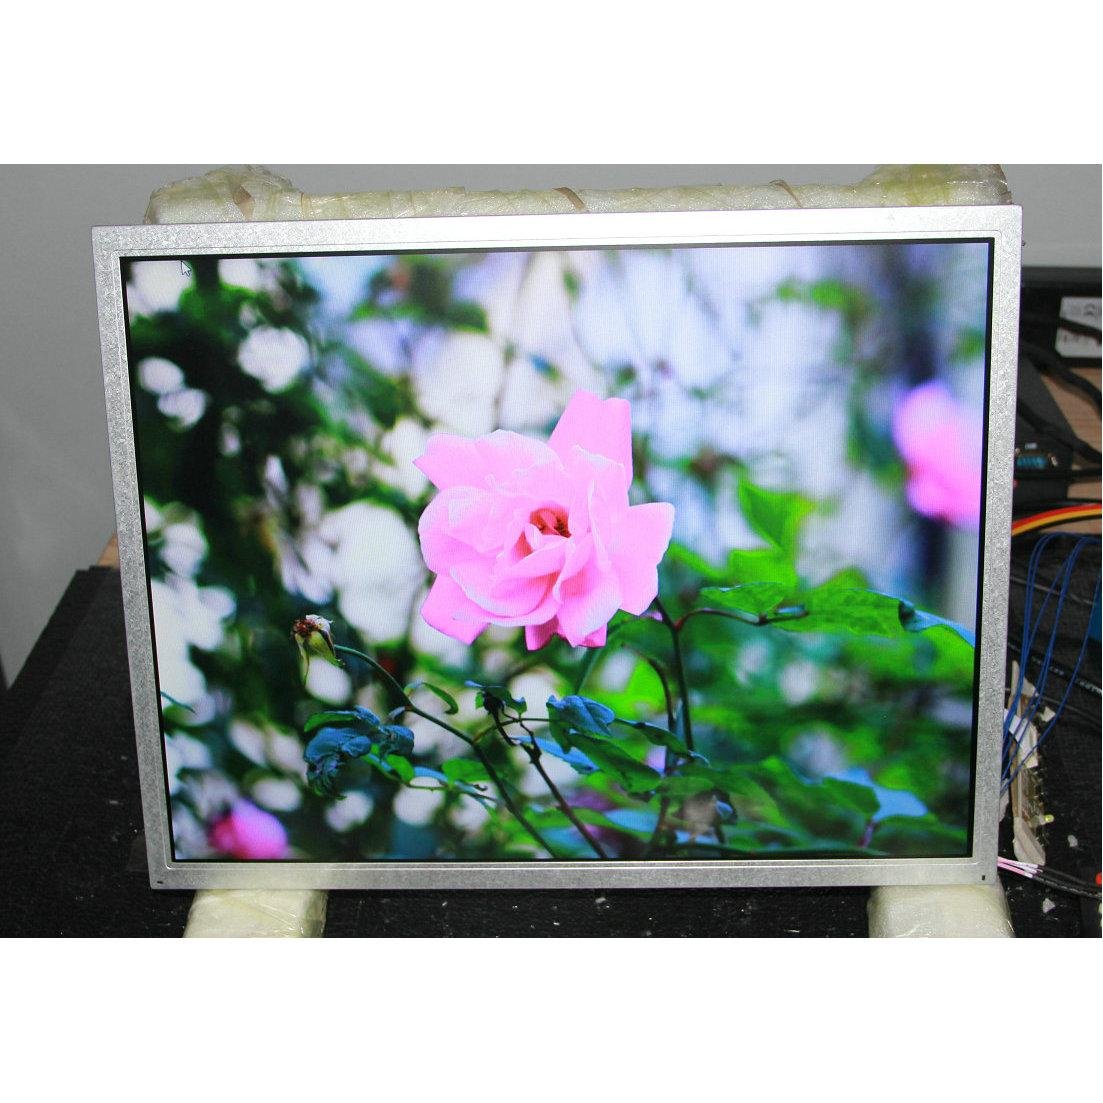  15 inch high brightness industrial control LCD screen -30-85 degree use 2